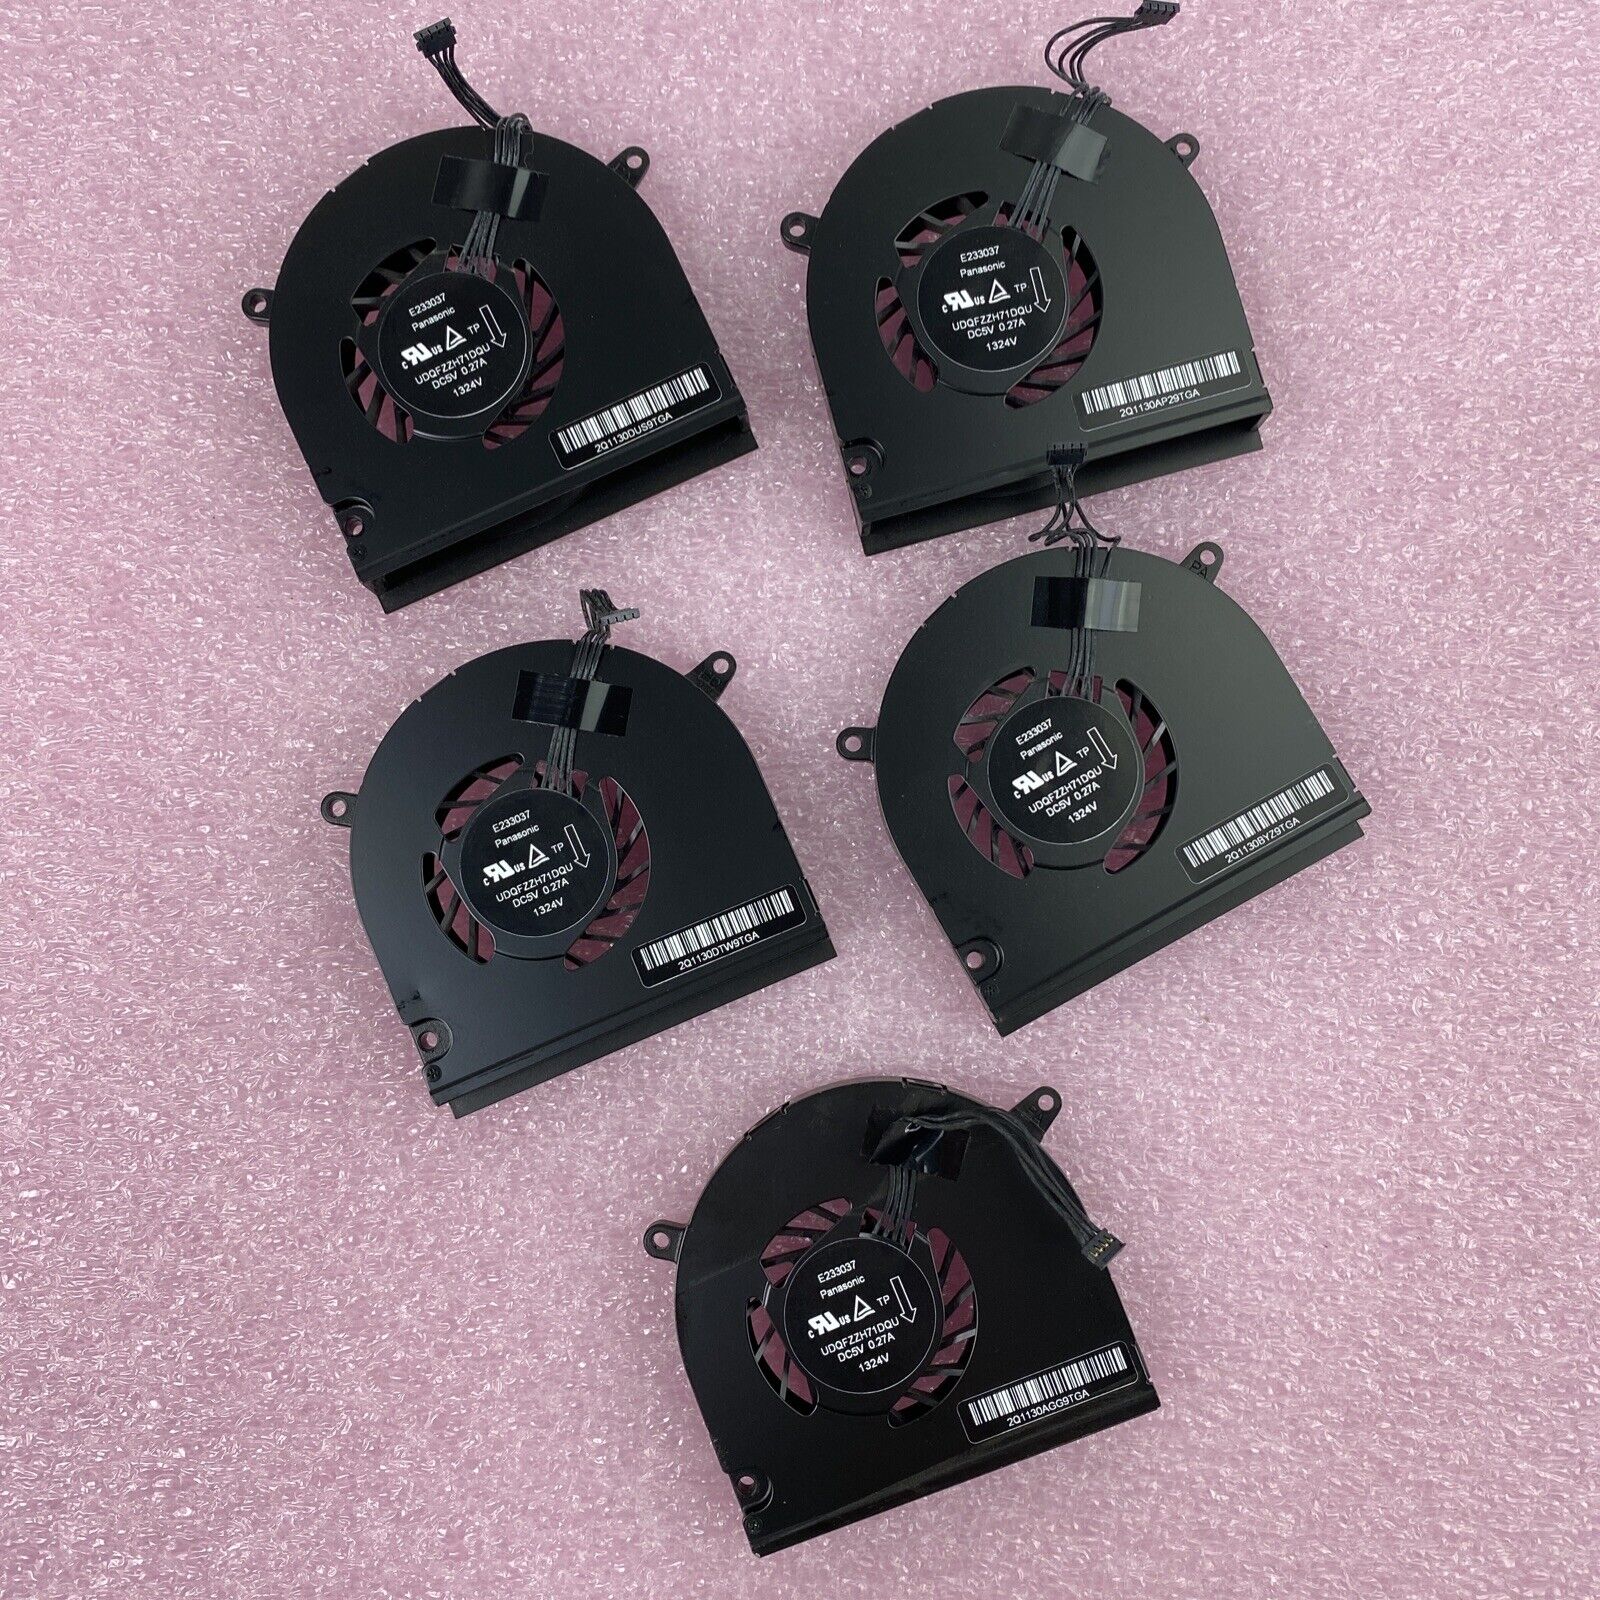 Lot of 5 Panasonic UDQFZZH71DQU CPU Internal Cooling Fans for MacBook Pro A1278